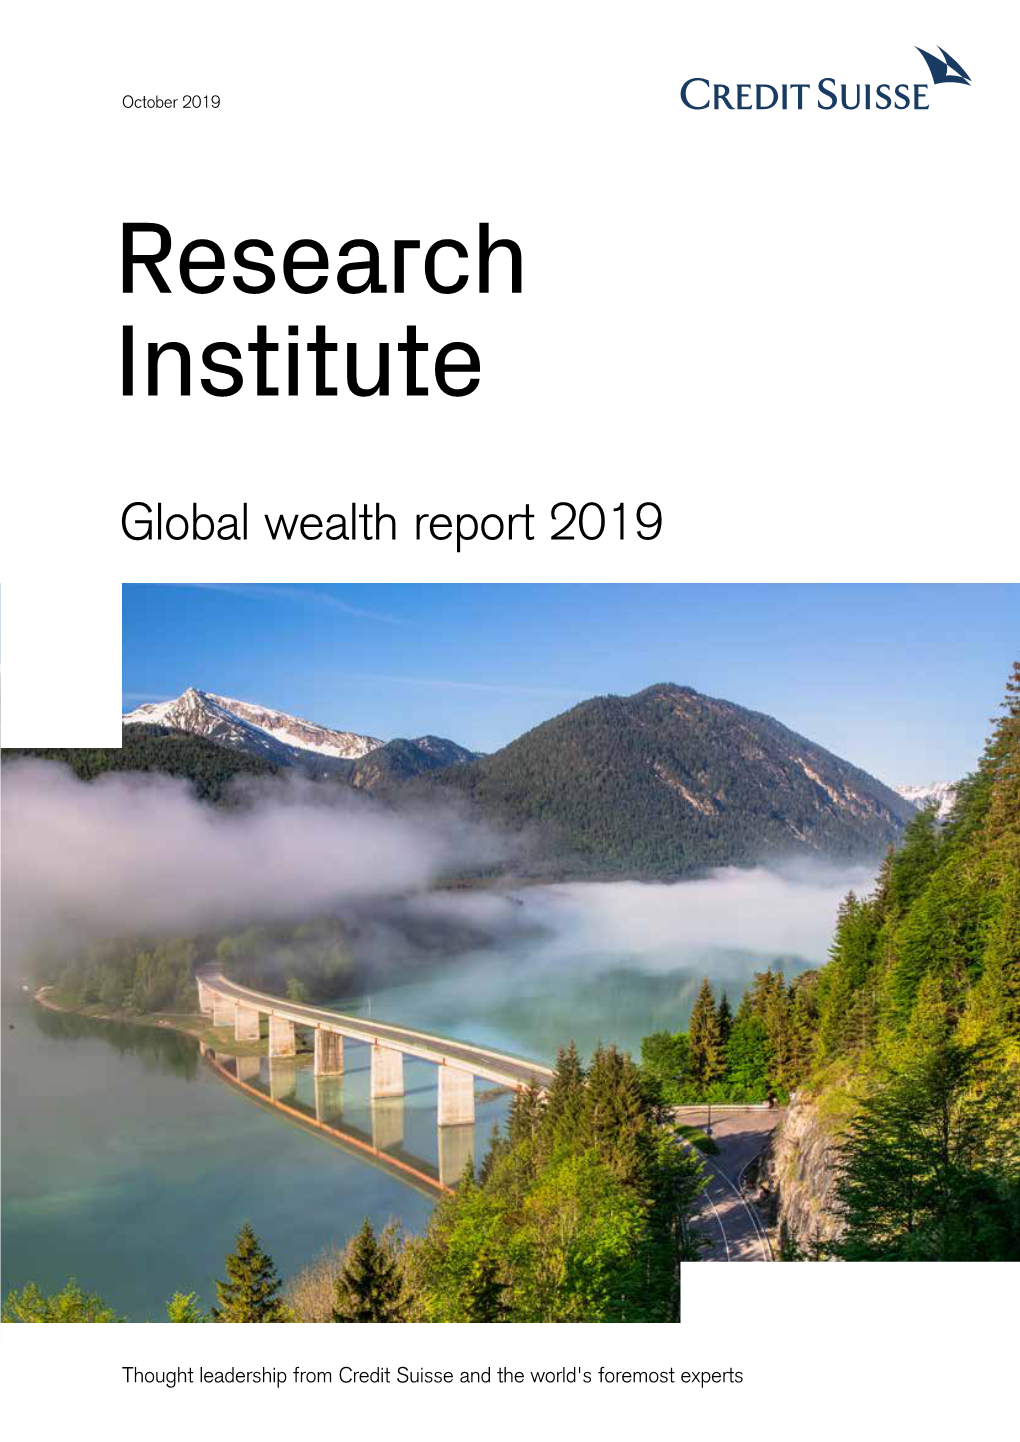 The Global Wealth Report 2019 in Mid-2019